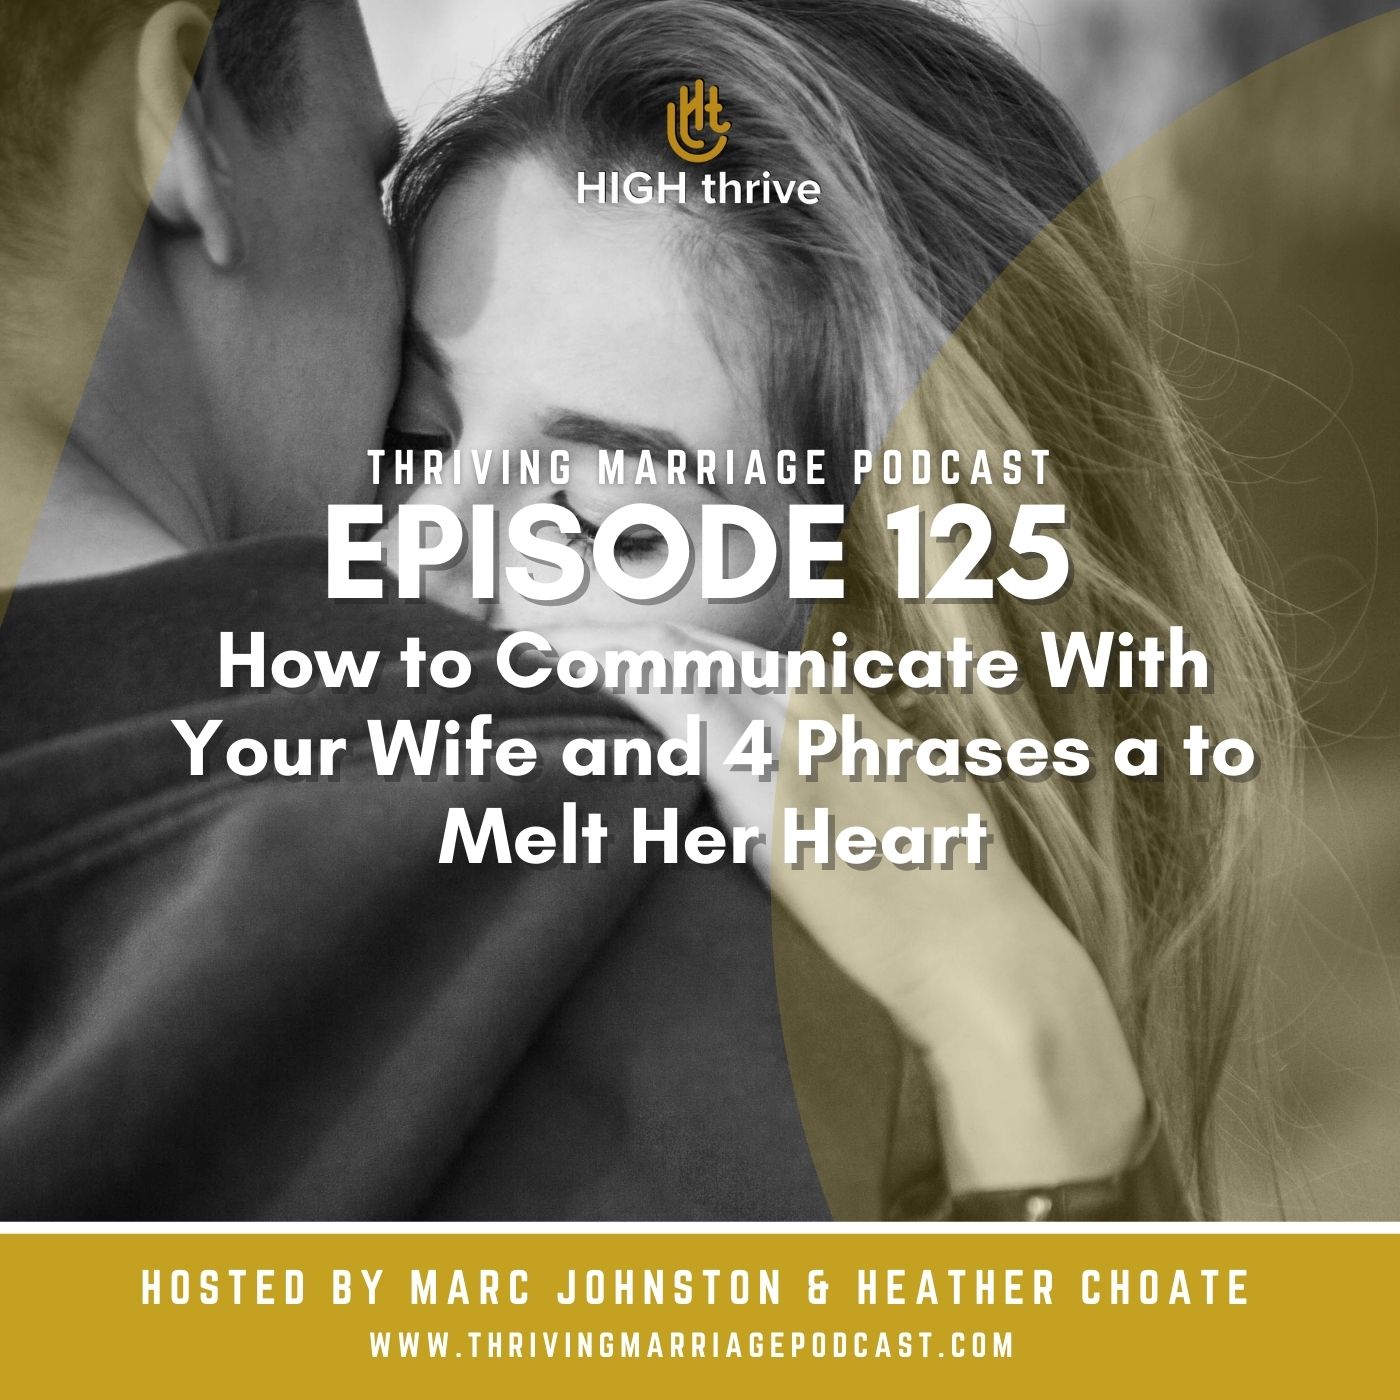 Episode 125: How to Communicate with your wife and 4 Phrases a to melt her heart